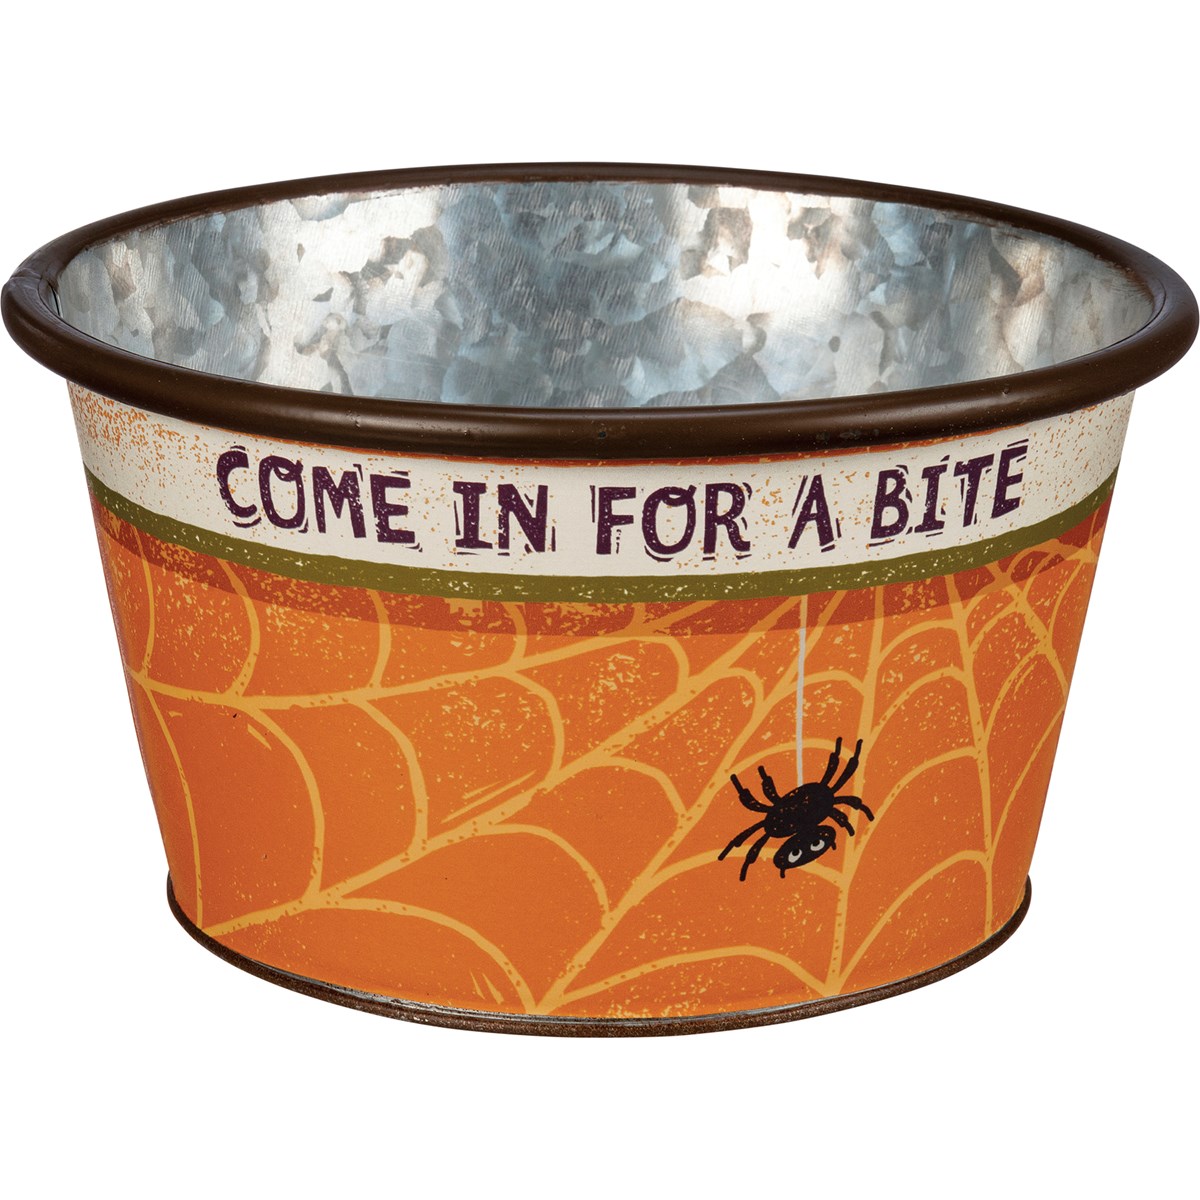 Bucket Set - Too Much Candy Said No One Ever - 9" Diameter x 5", 8" Diameter x 4.50" - Metal, Paper